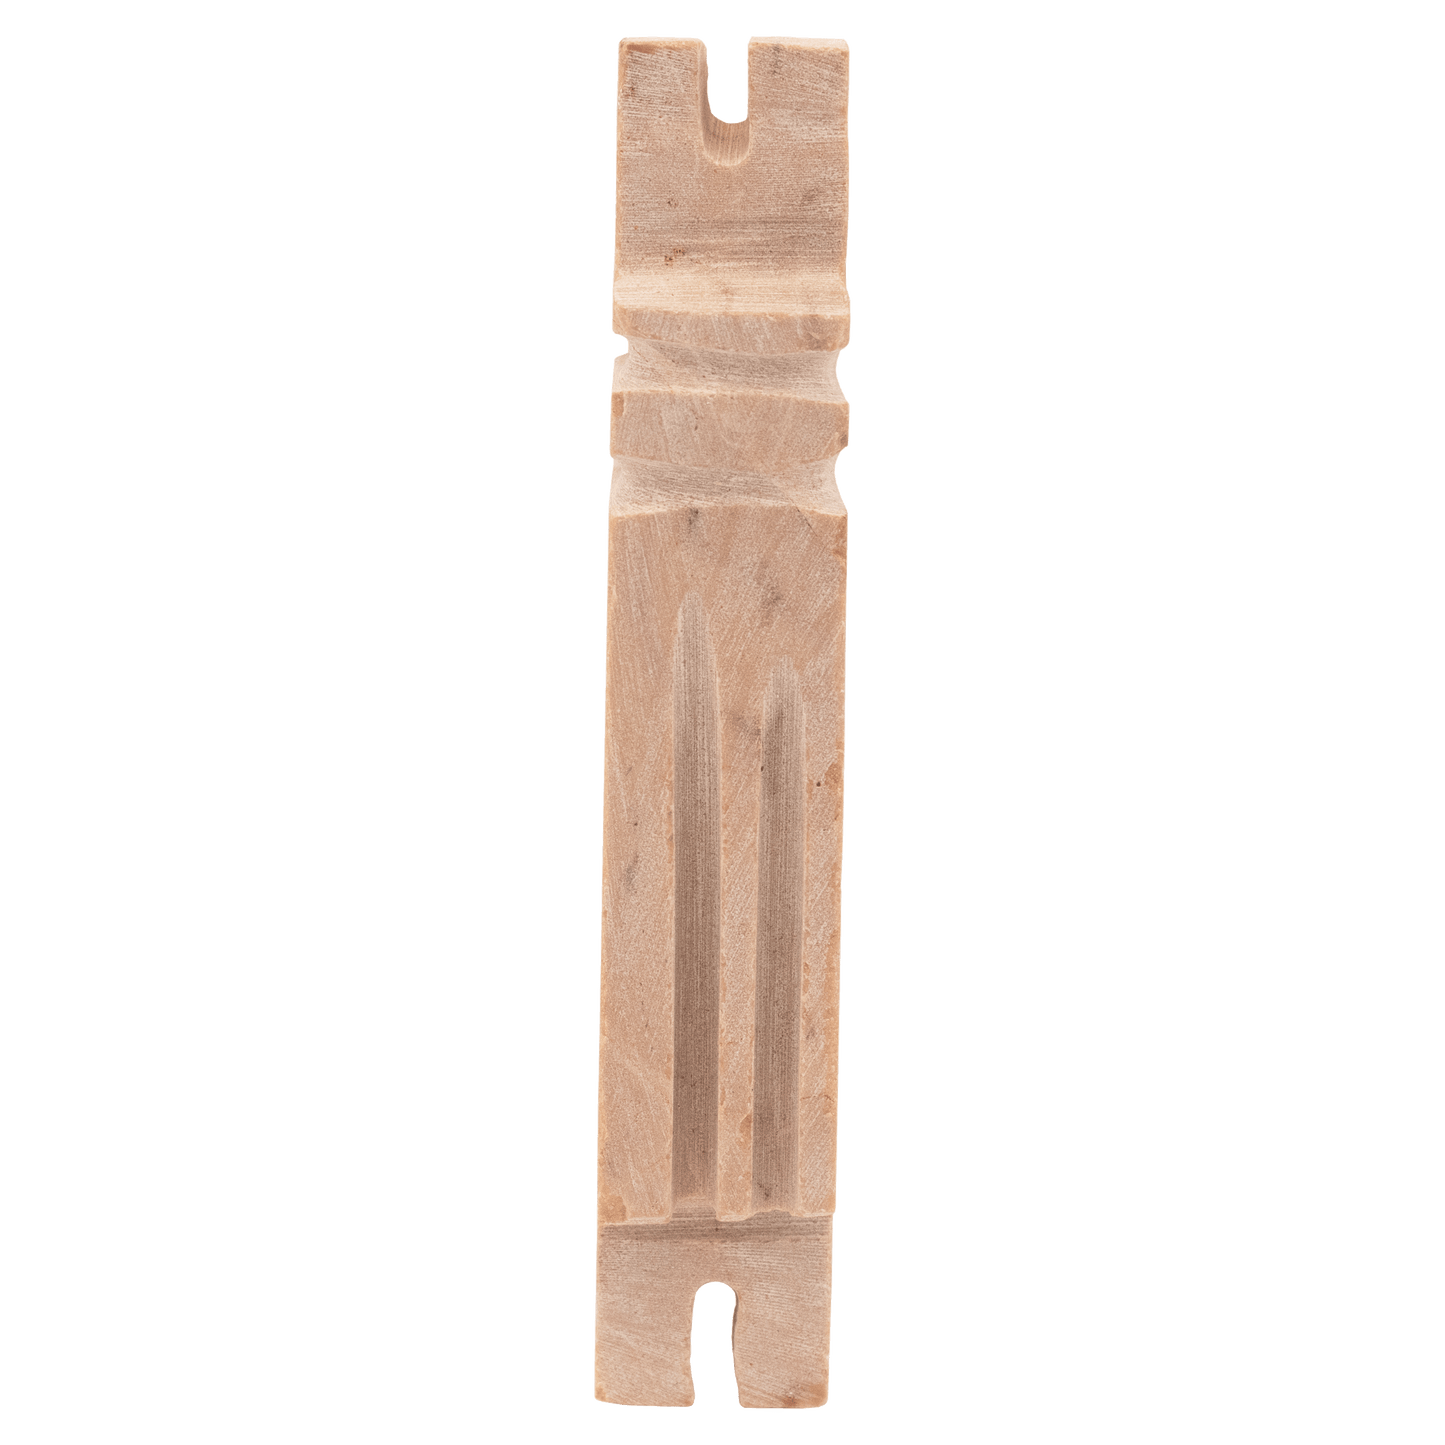 Shin Stone Mezuzah with two grooves.